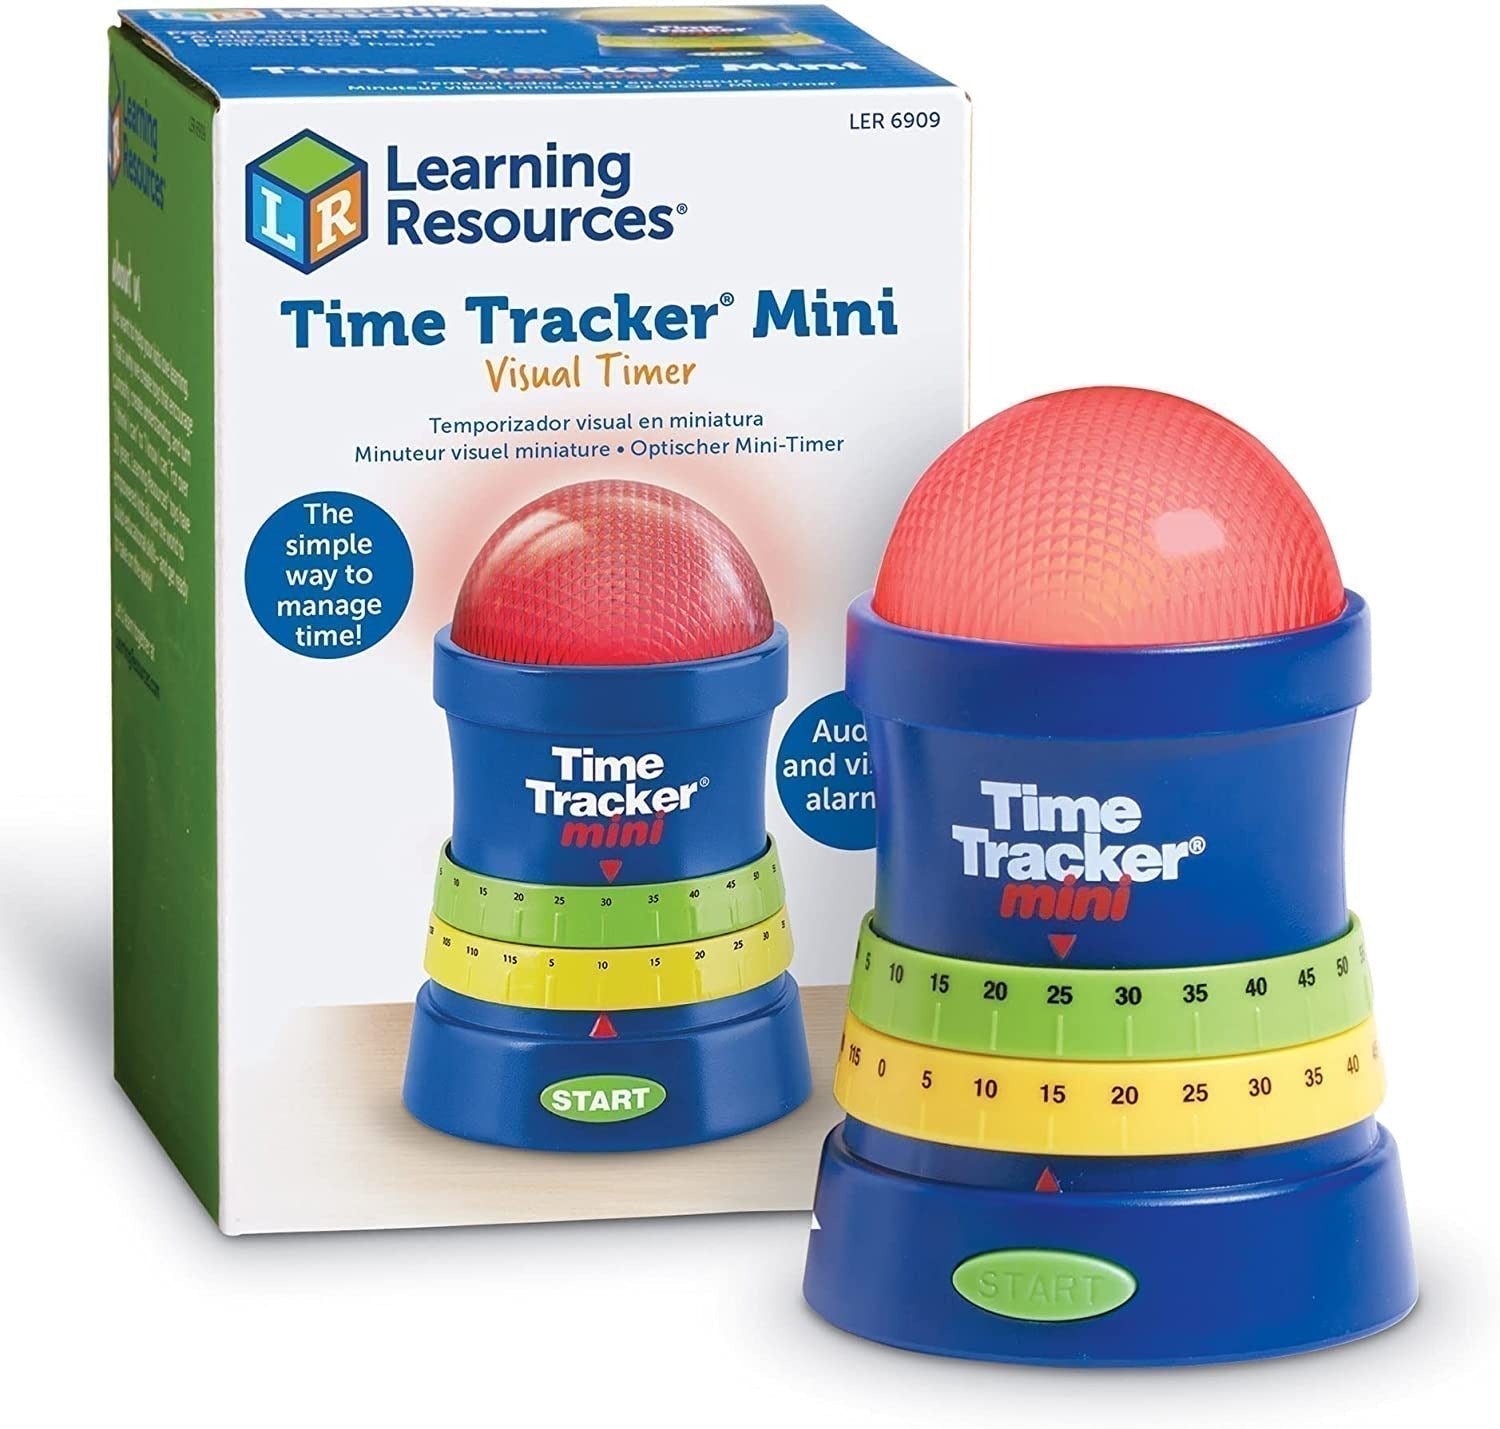 Time Tracker Mini, The Time Tracker Mini is the easy way to manage time in the classroom or at home. This simple version of the original Time Tracker can be used to support a variety of classroom activities.The timer runs on 3x AAA batteries (sold separately) so you can move it anywhere you like in the classroom, art studio, science lab, or your own home. The Time Tracker Mini is great for quick tasks and longer sessions alike. You can set the total alarm time from 5 minutes to 2 hours, in 5-minute incremen